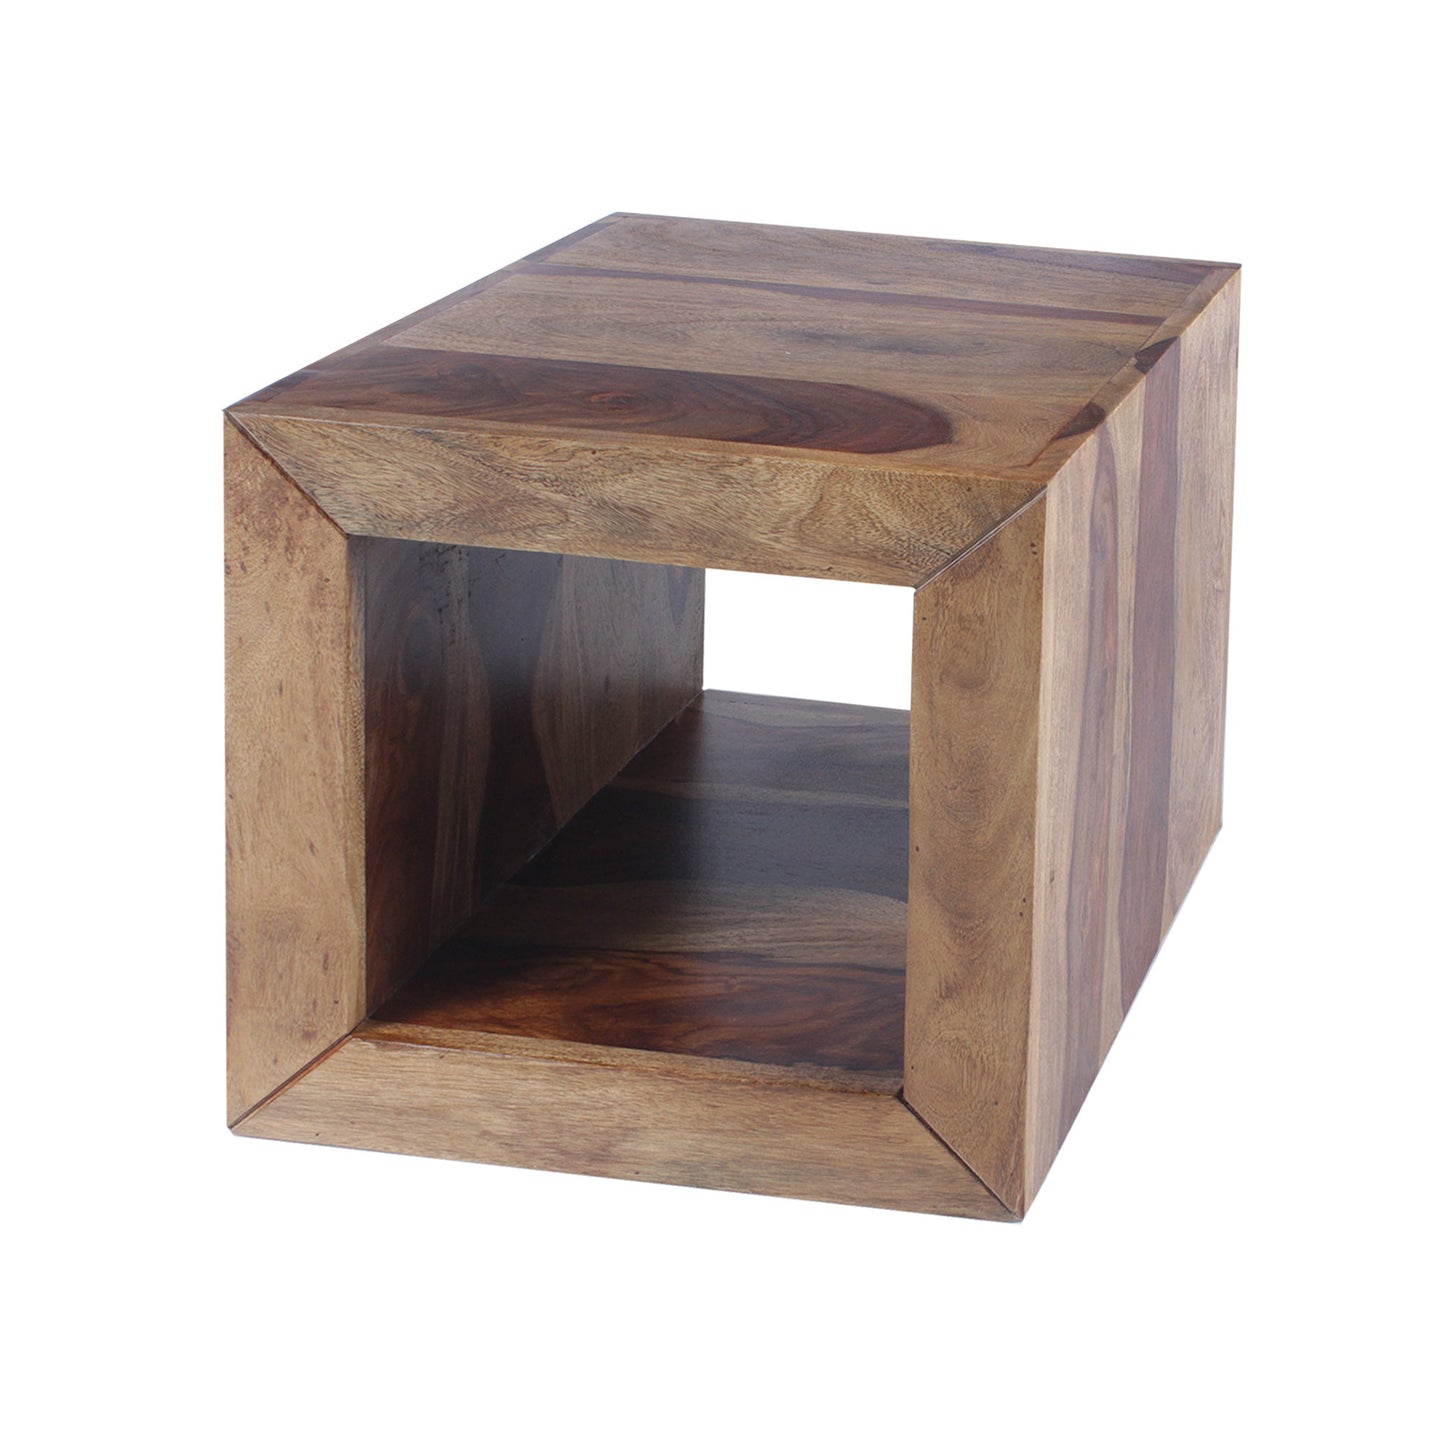 Cube Shape Rosewood Side Table With Cutout Bottom by Blak Hom